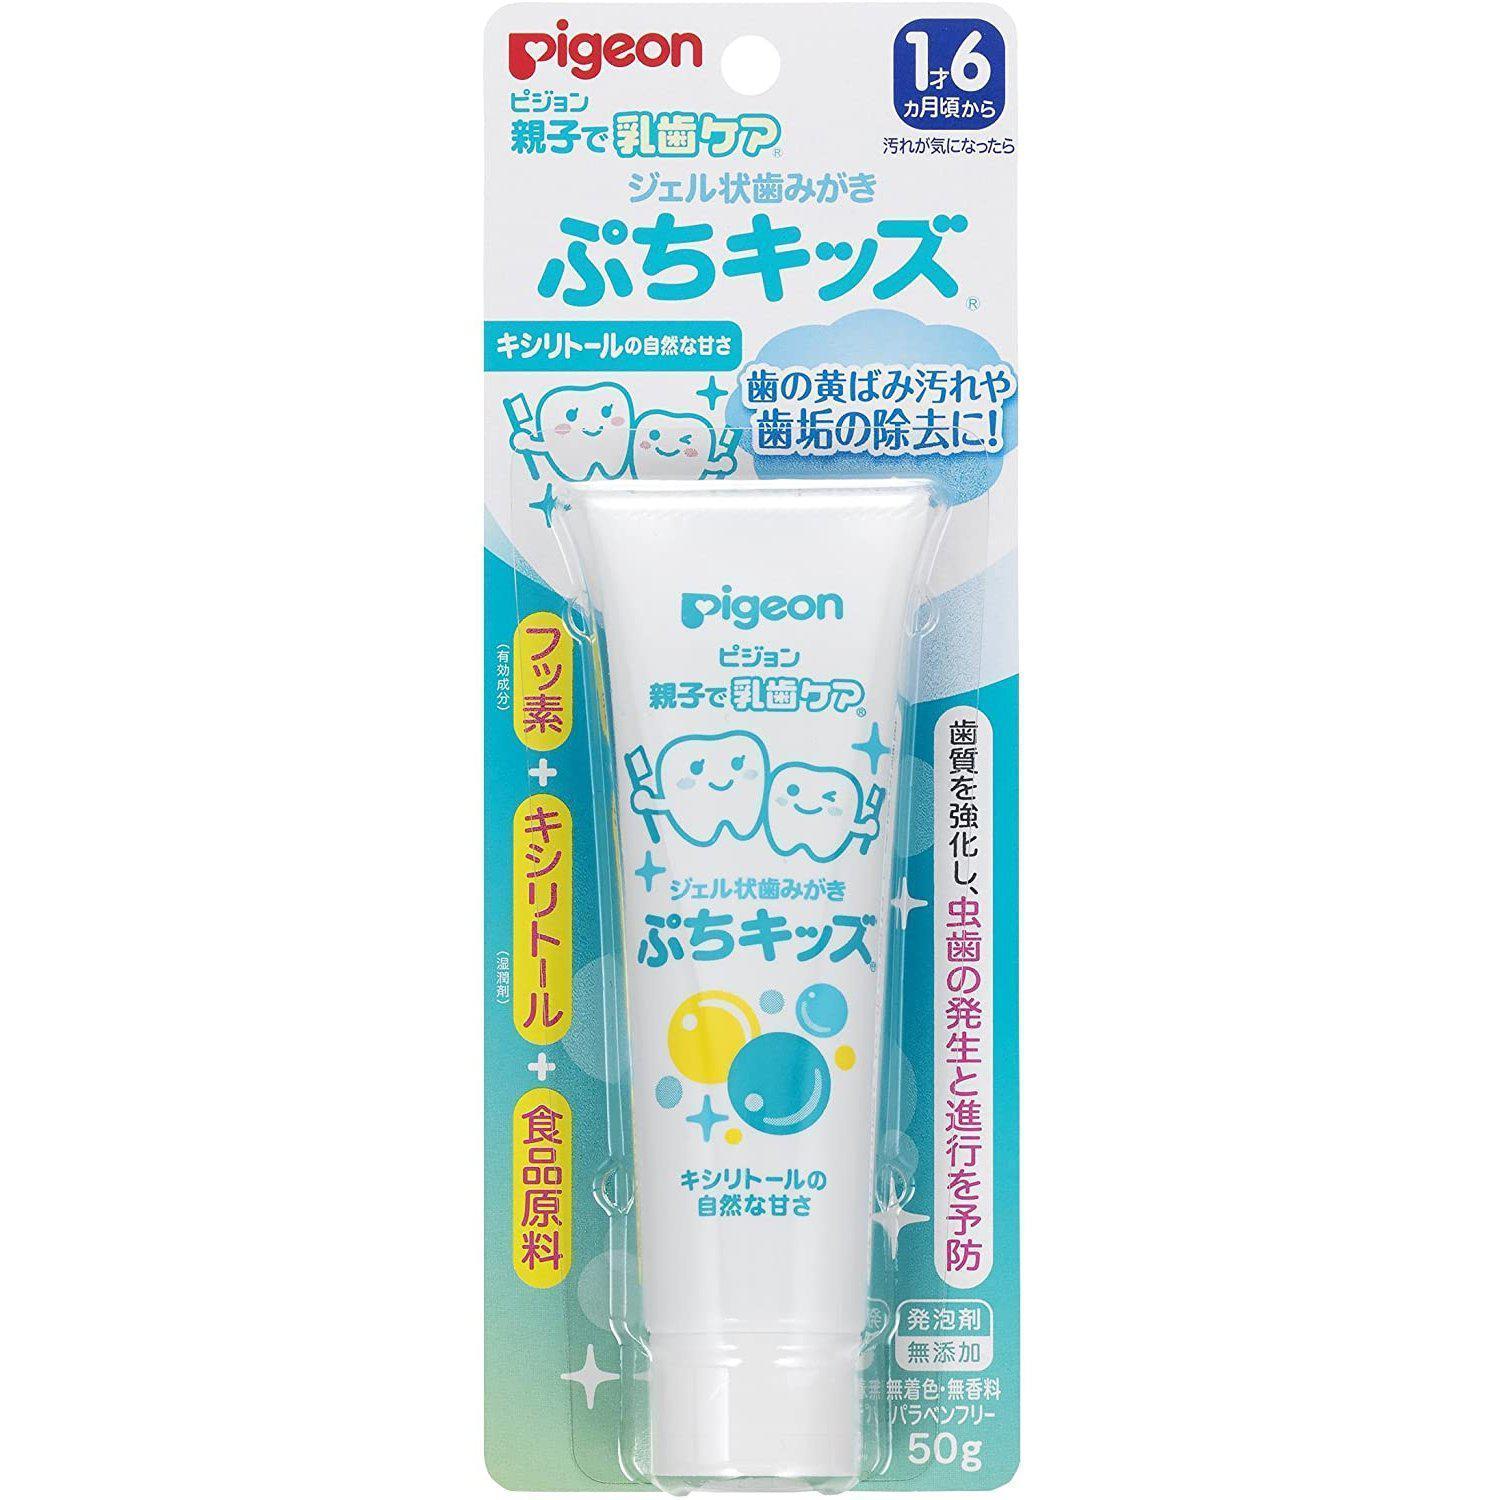 Pigeon Kids Tooth Gel Toothpaste Xylitol 50g